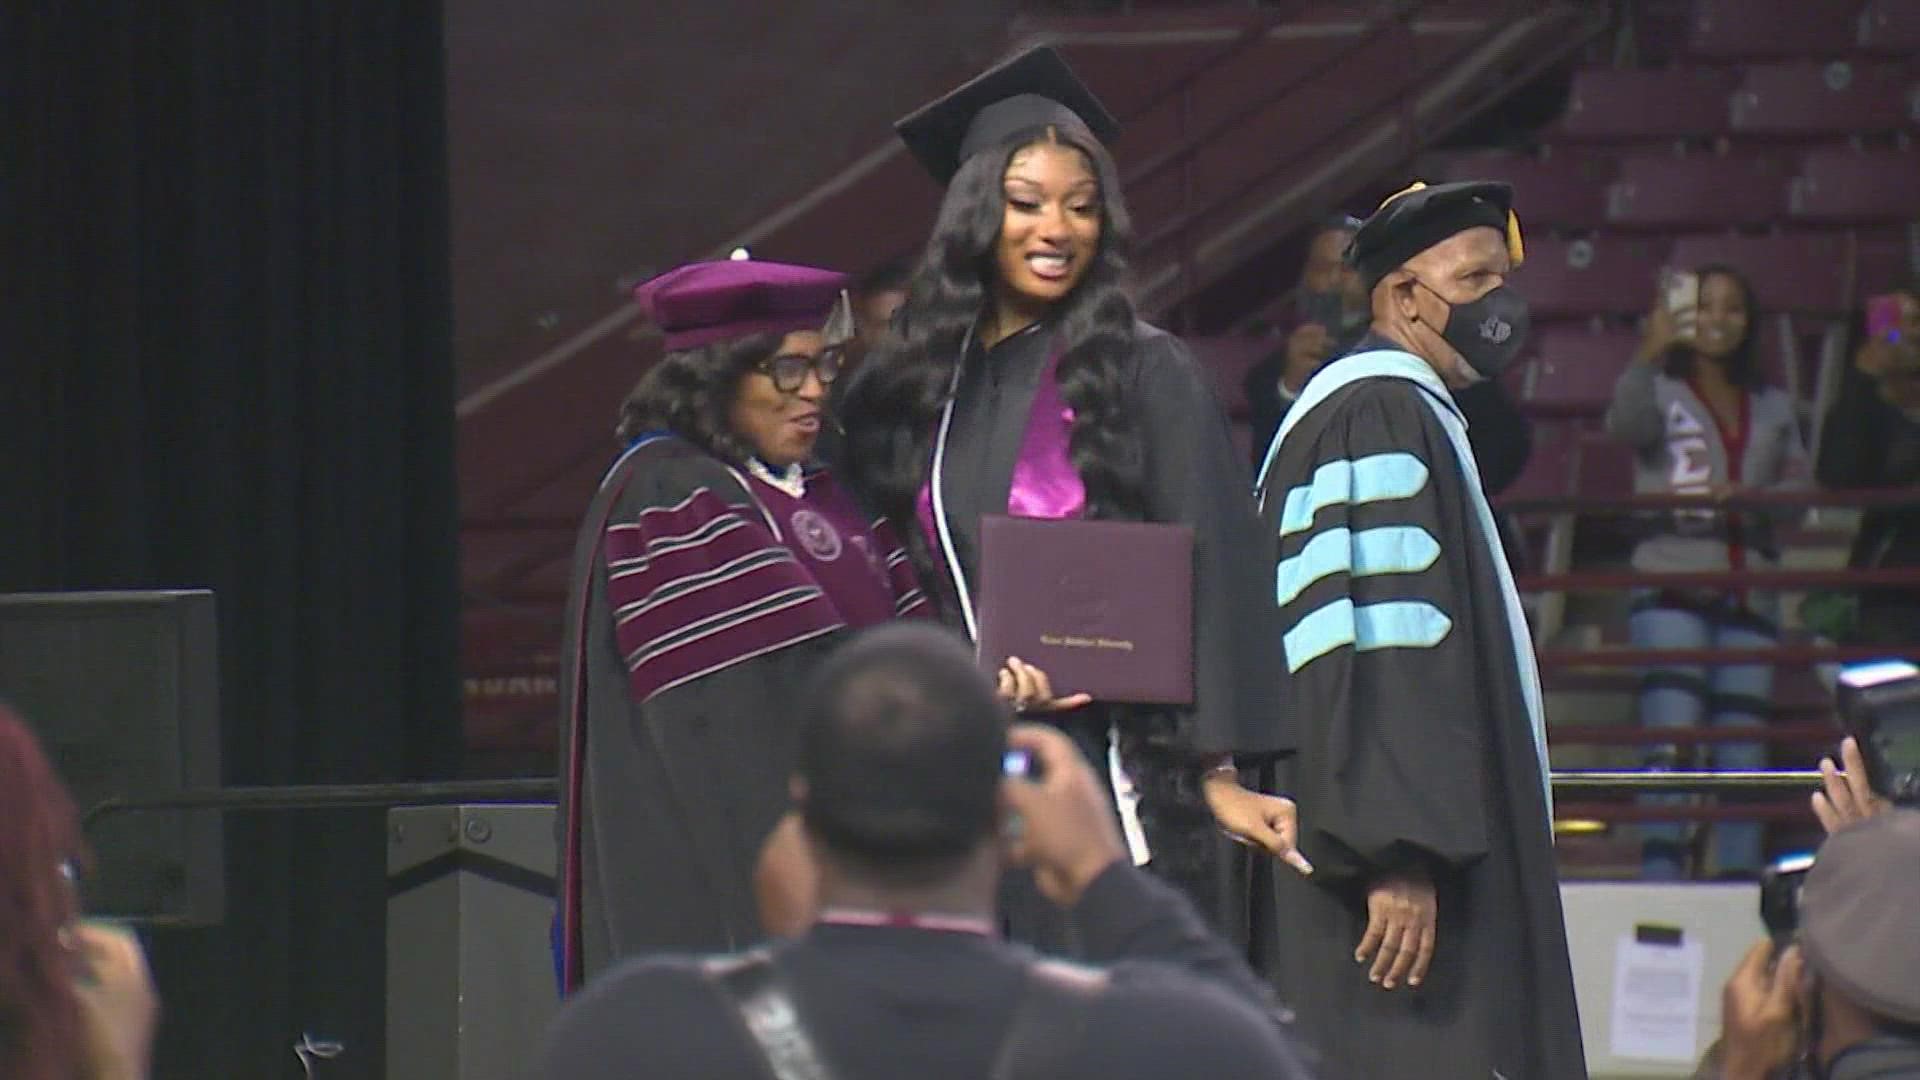 Houston's Megan Thee Stallion is now Megan Thee Graduate! She walked across the stage Saturday at Texas Southern University's 2021 Winter Commencement Ceremony.